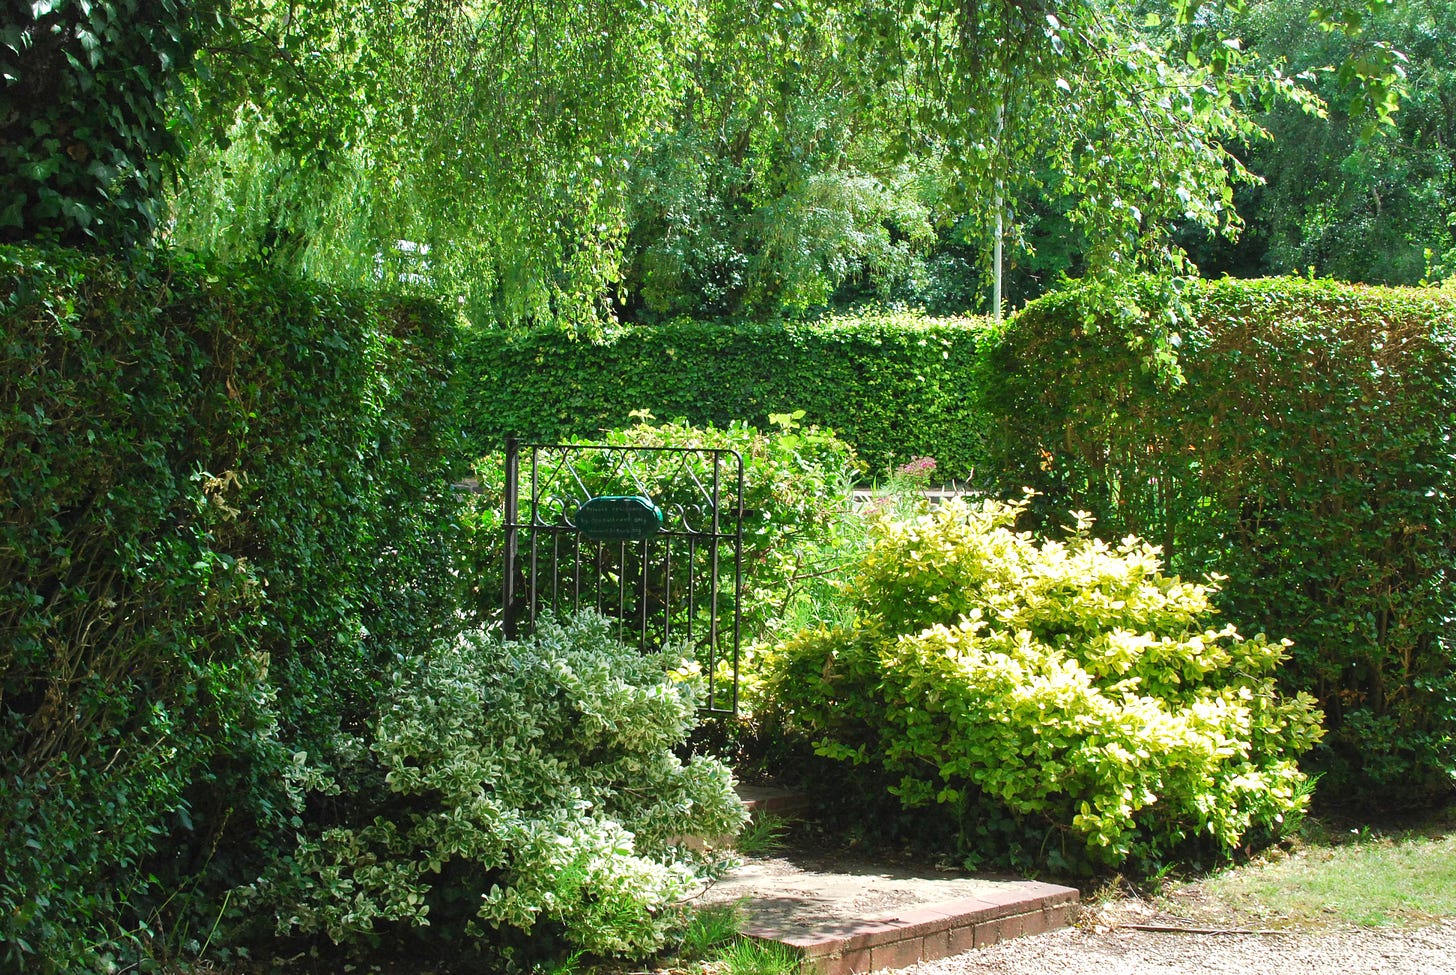 Welcome gate into the garden at the Kilns